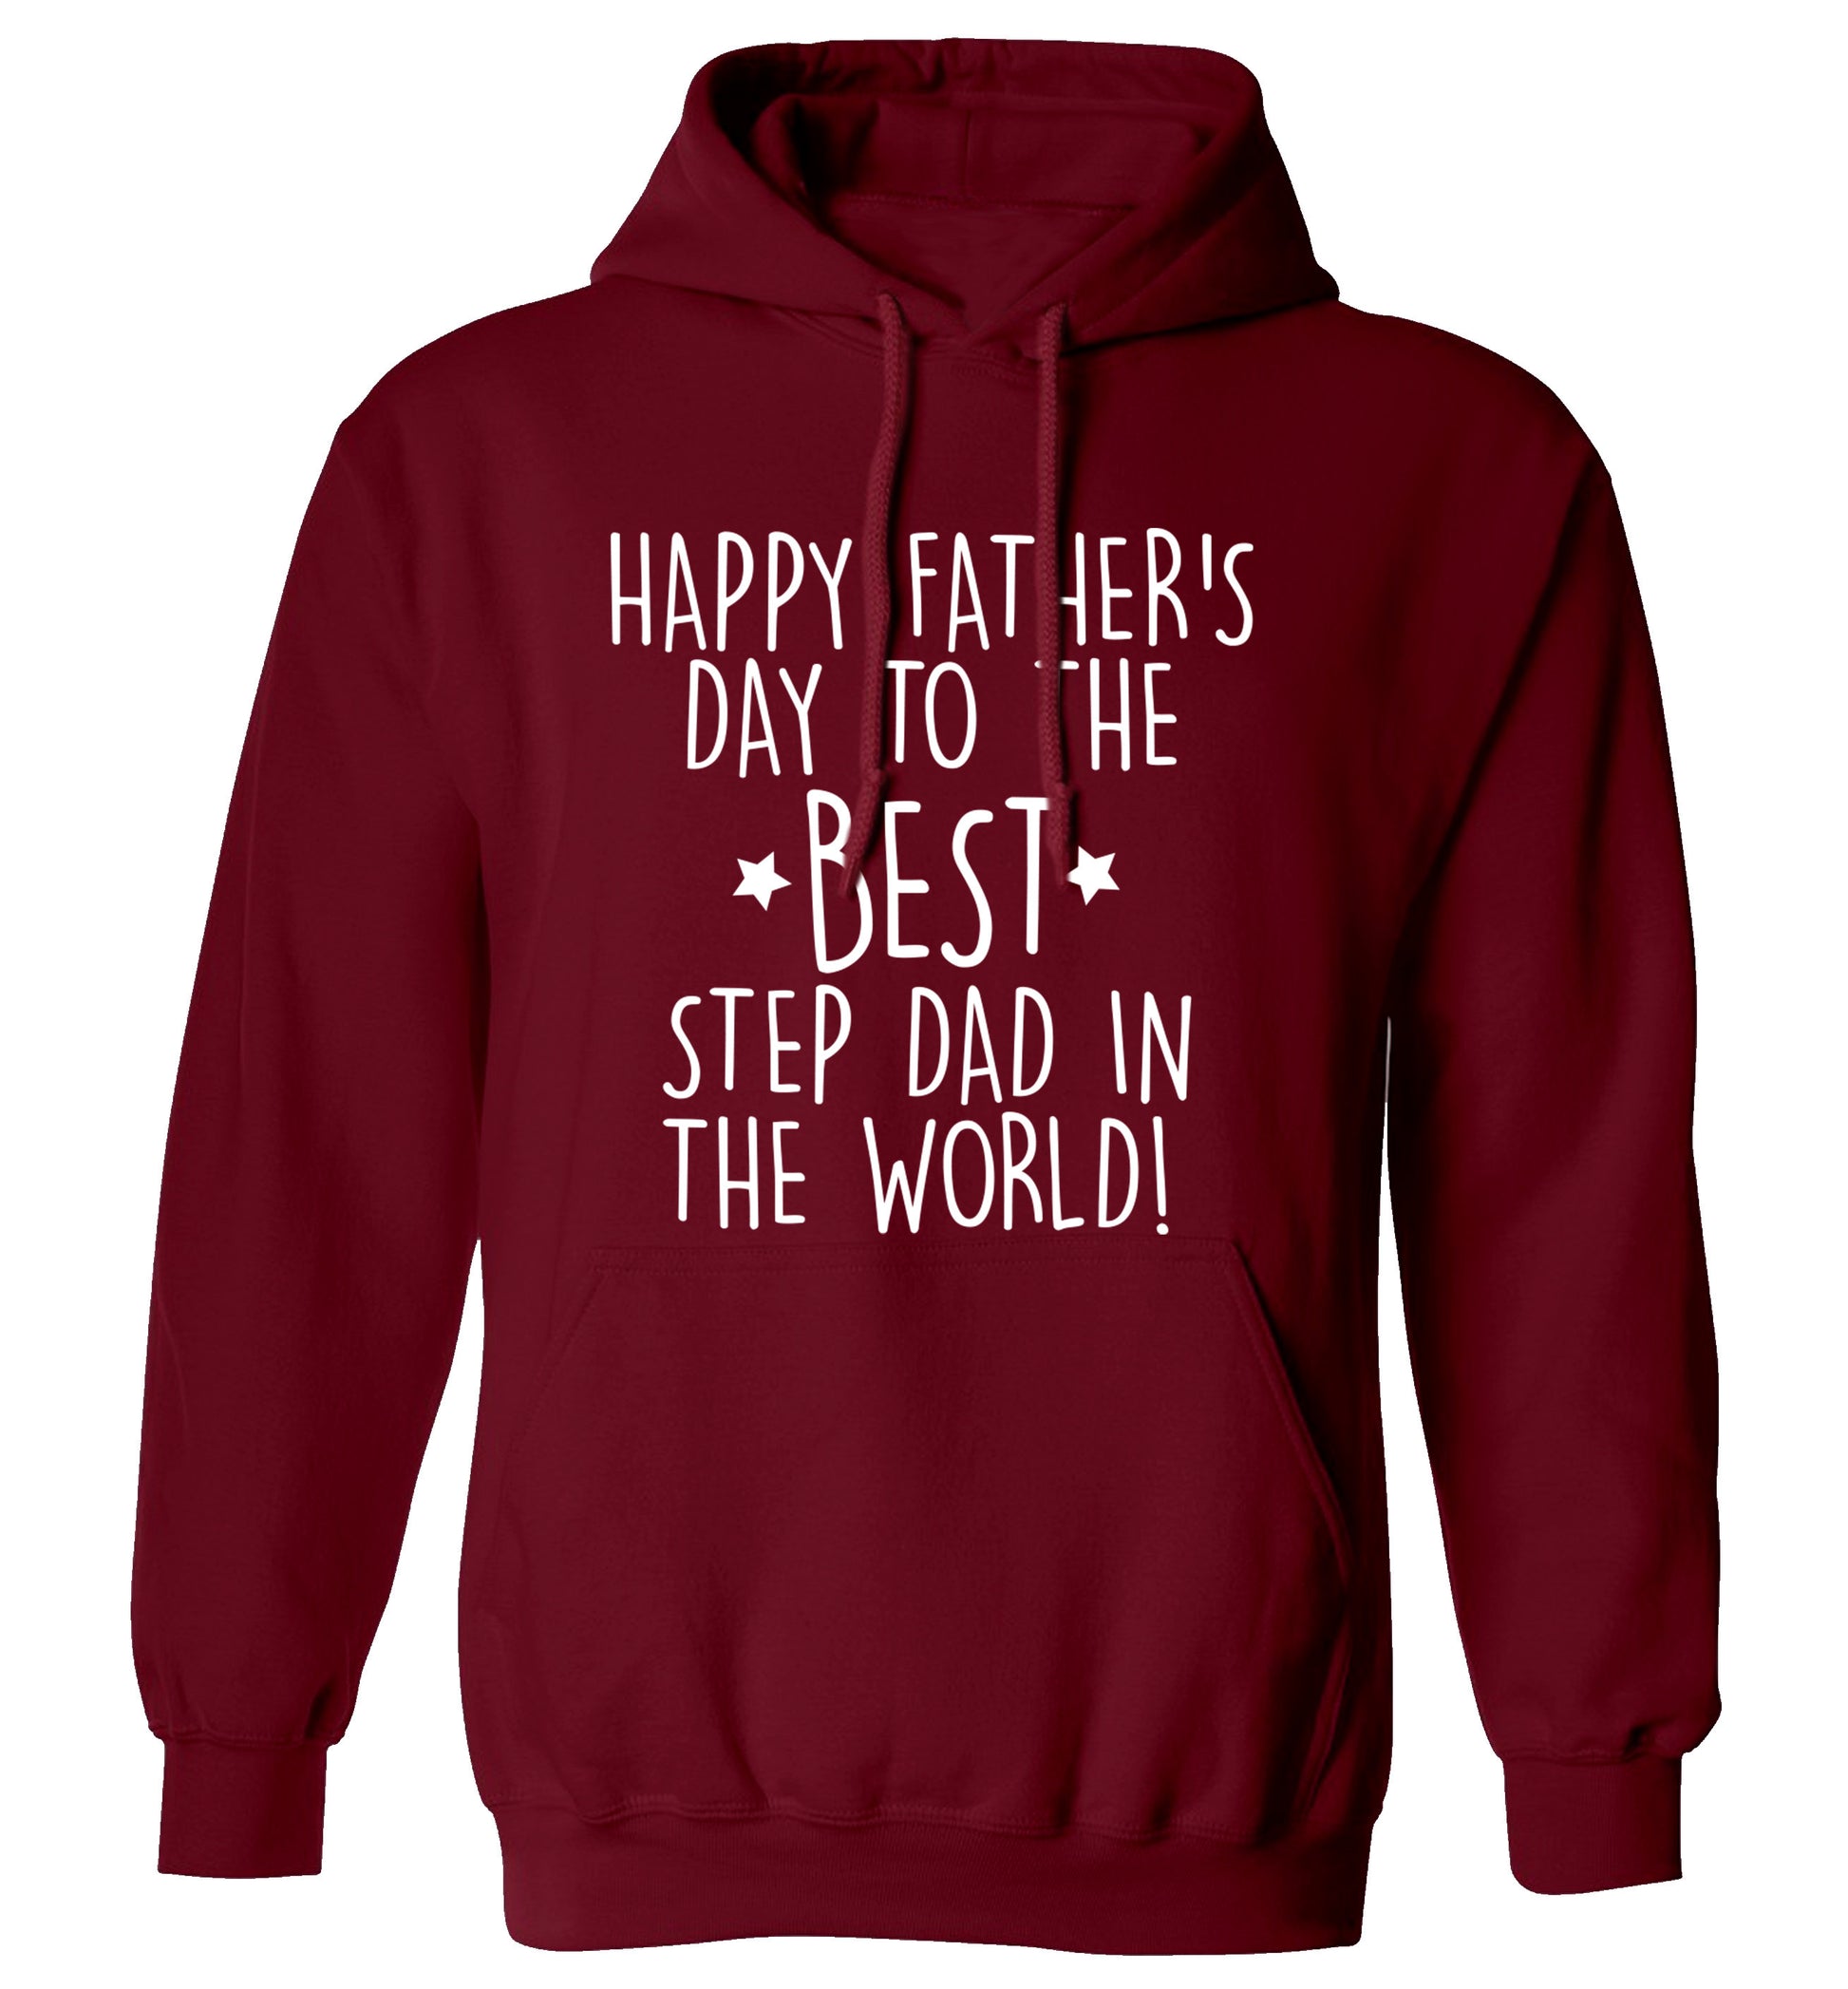 Happy Father's day to the best step dad in the world! adults unisex maroon hoodie 2XL